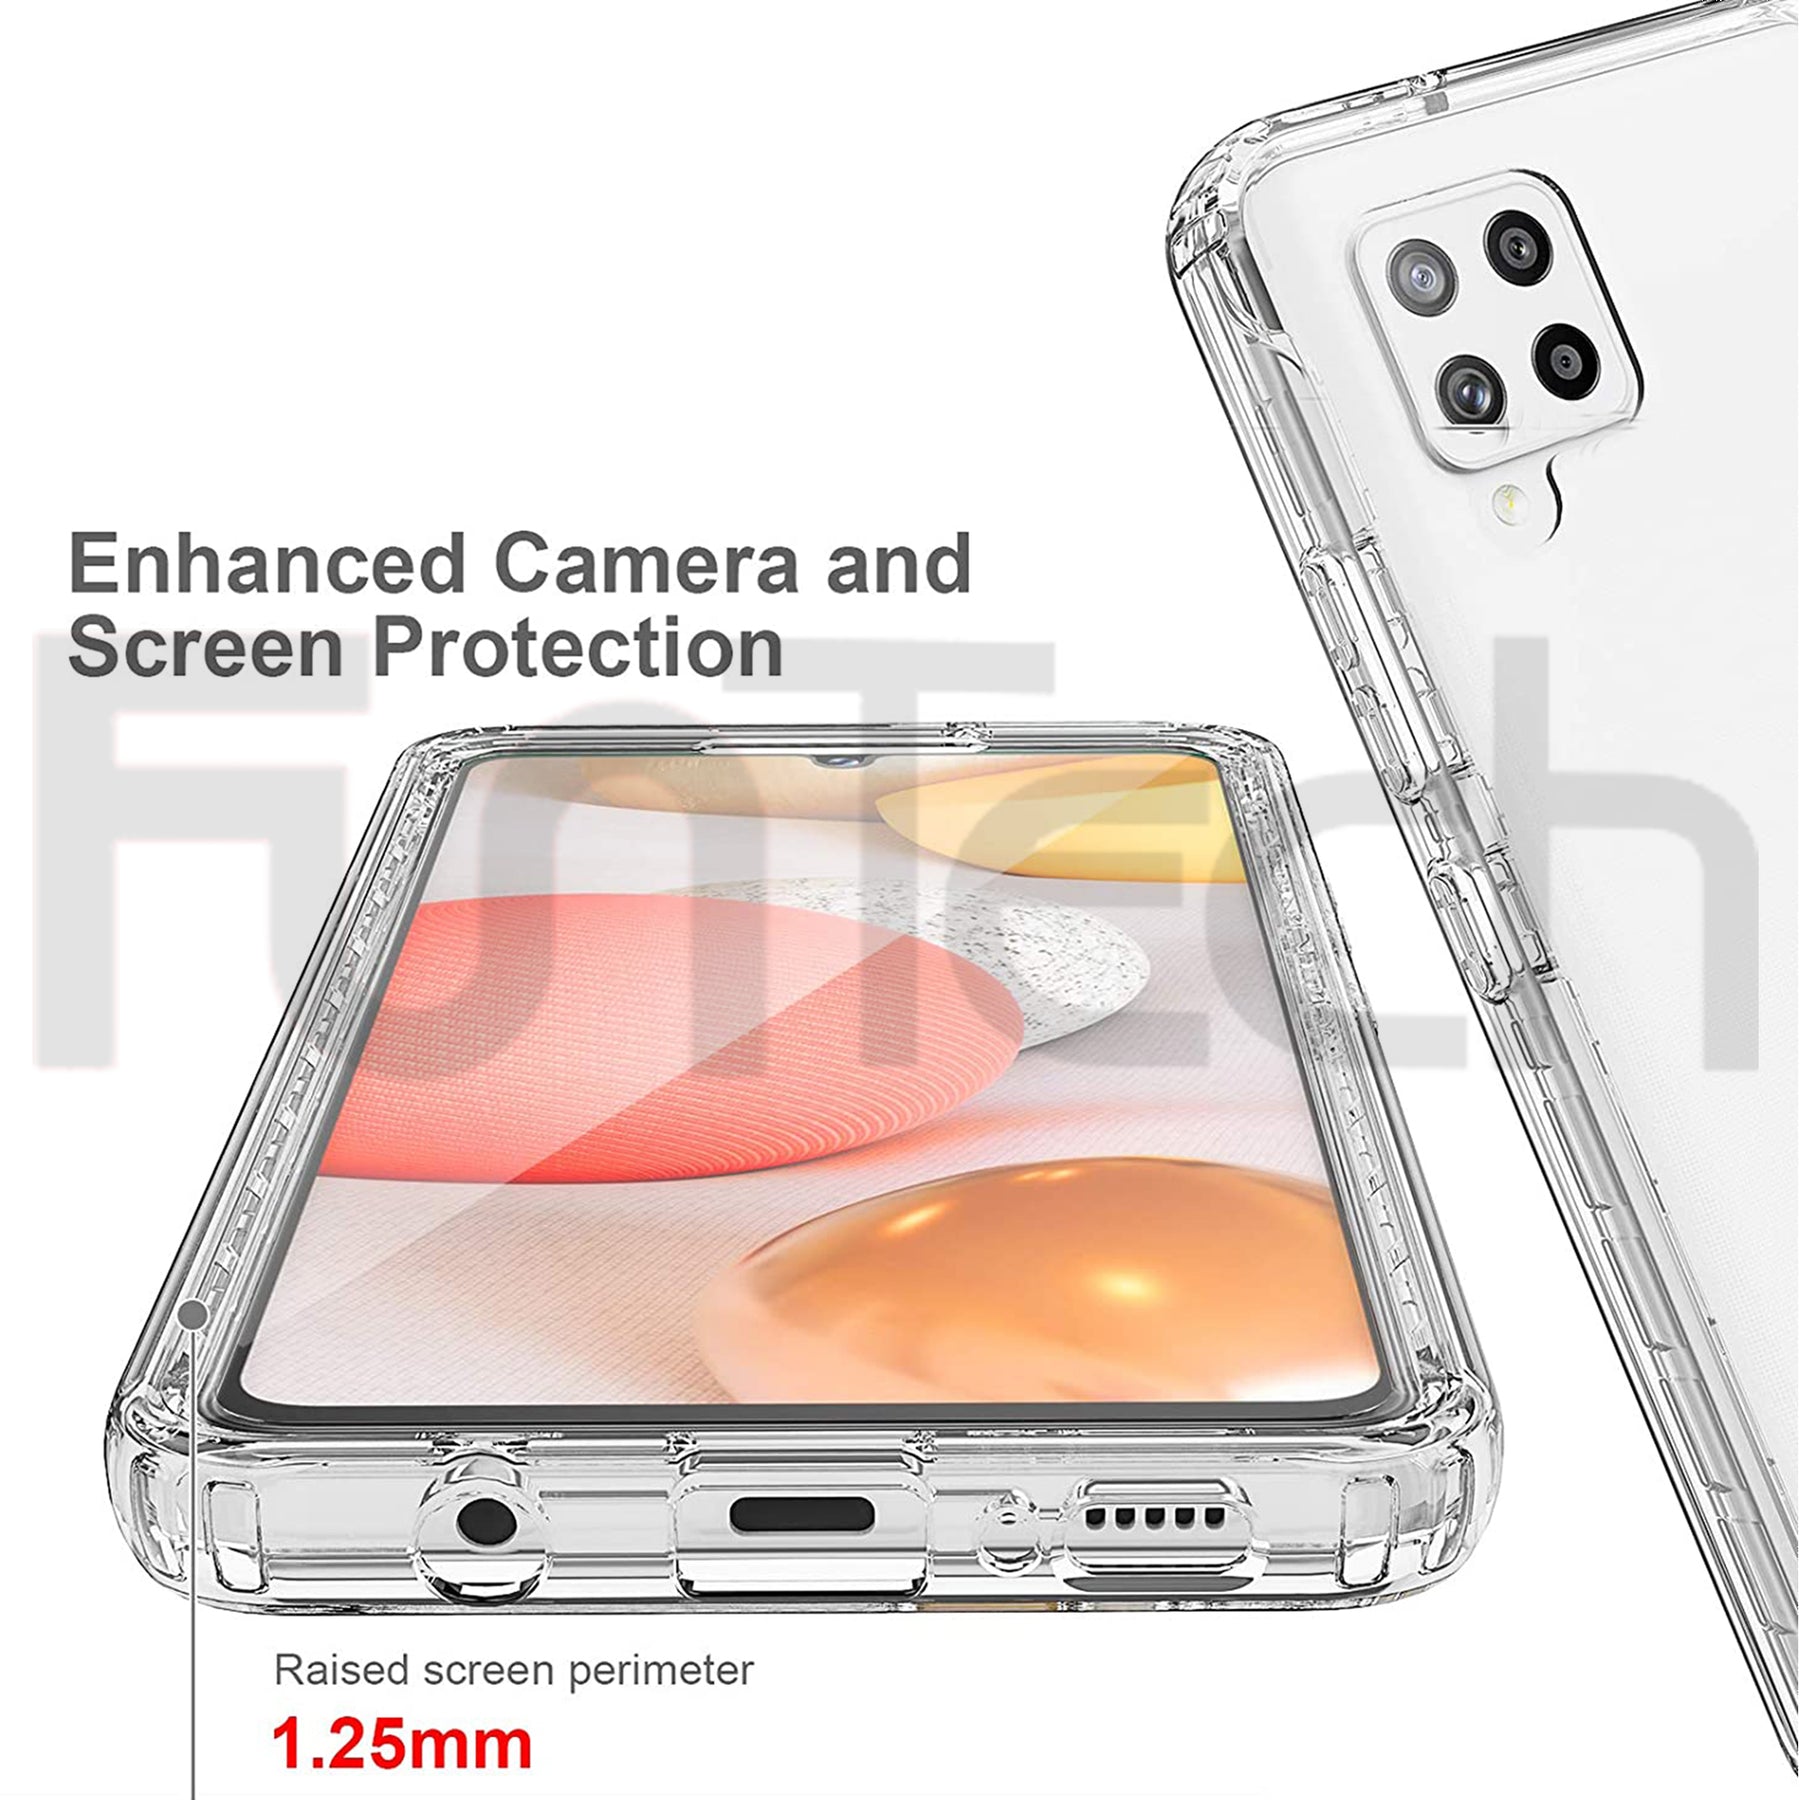 Samsung A42, Dual Layer Protection Case, Color Clear.